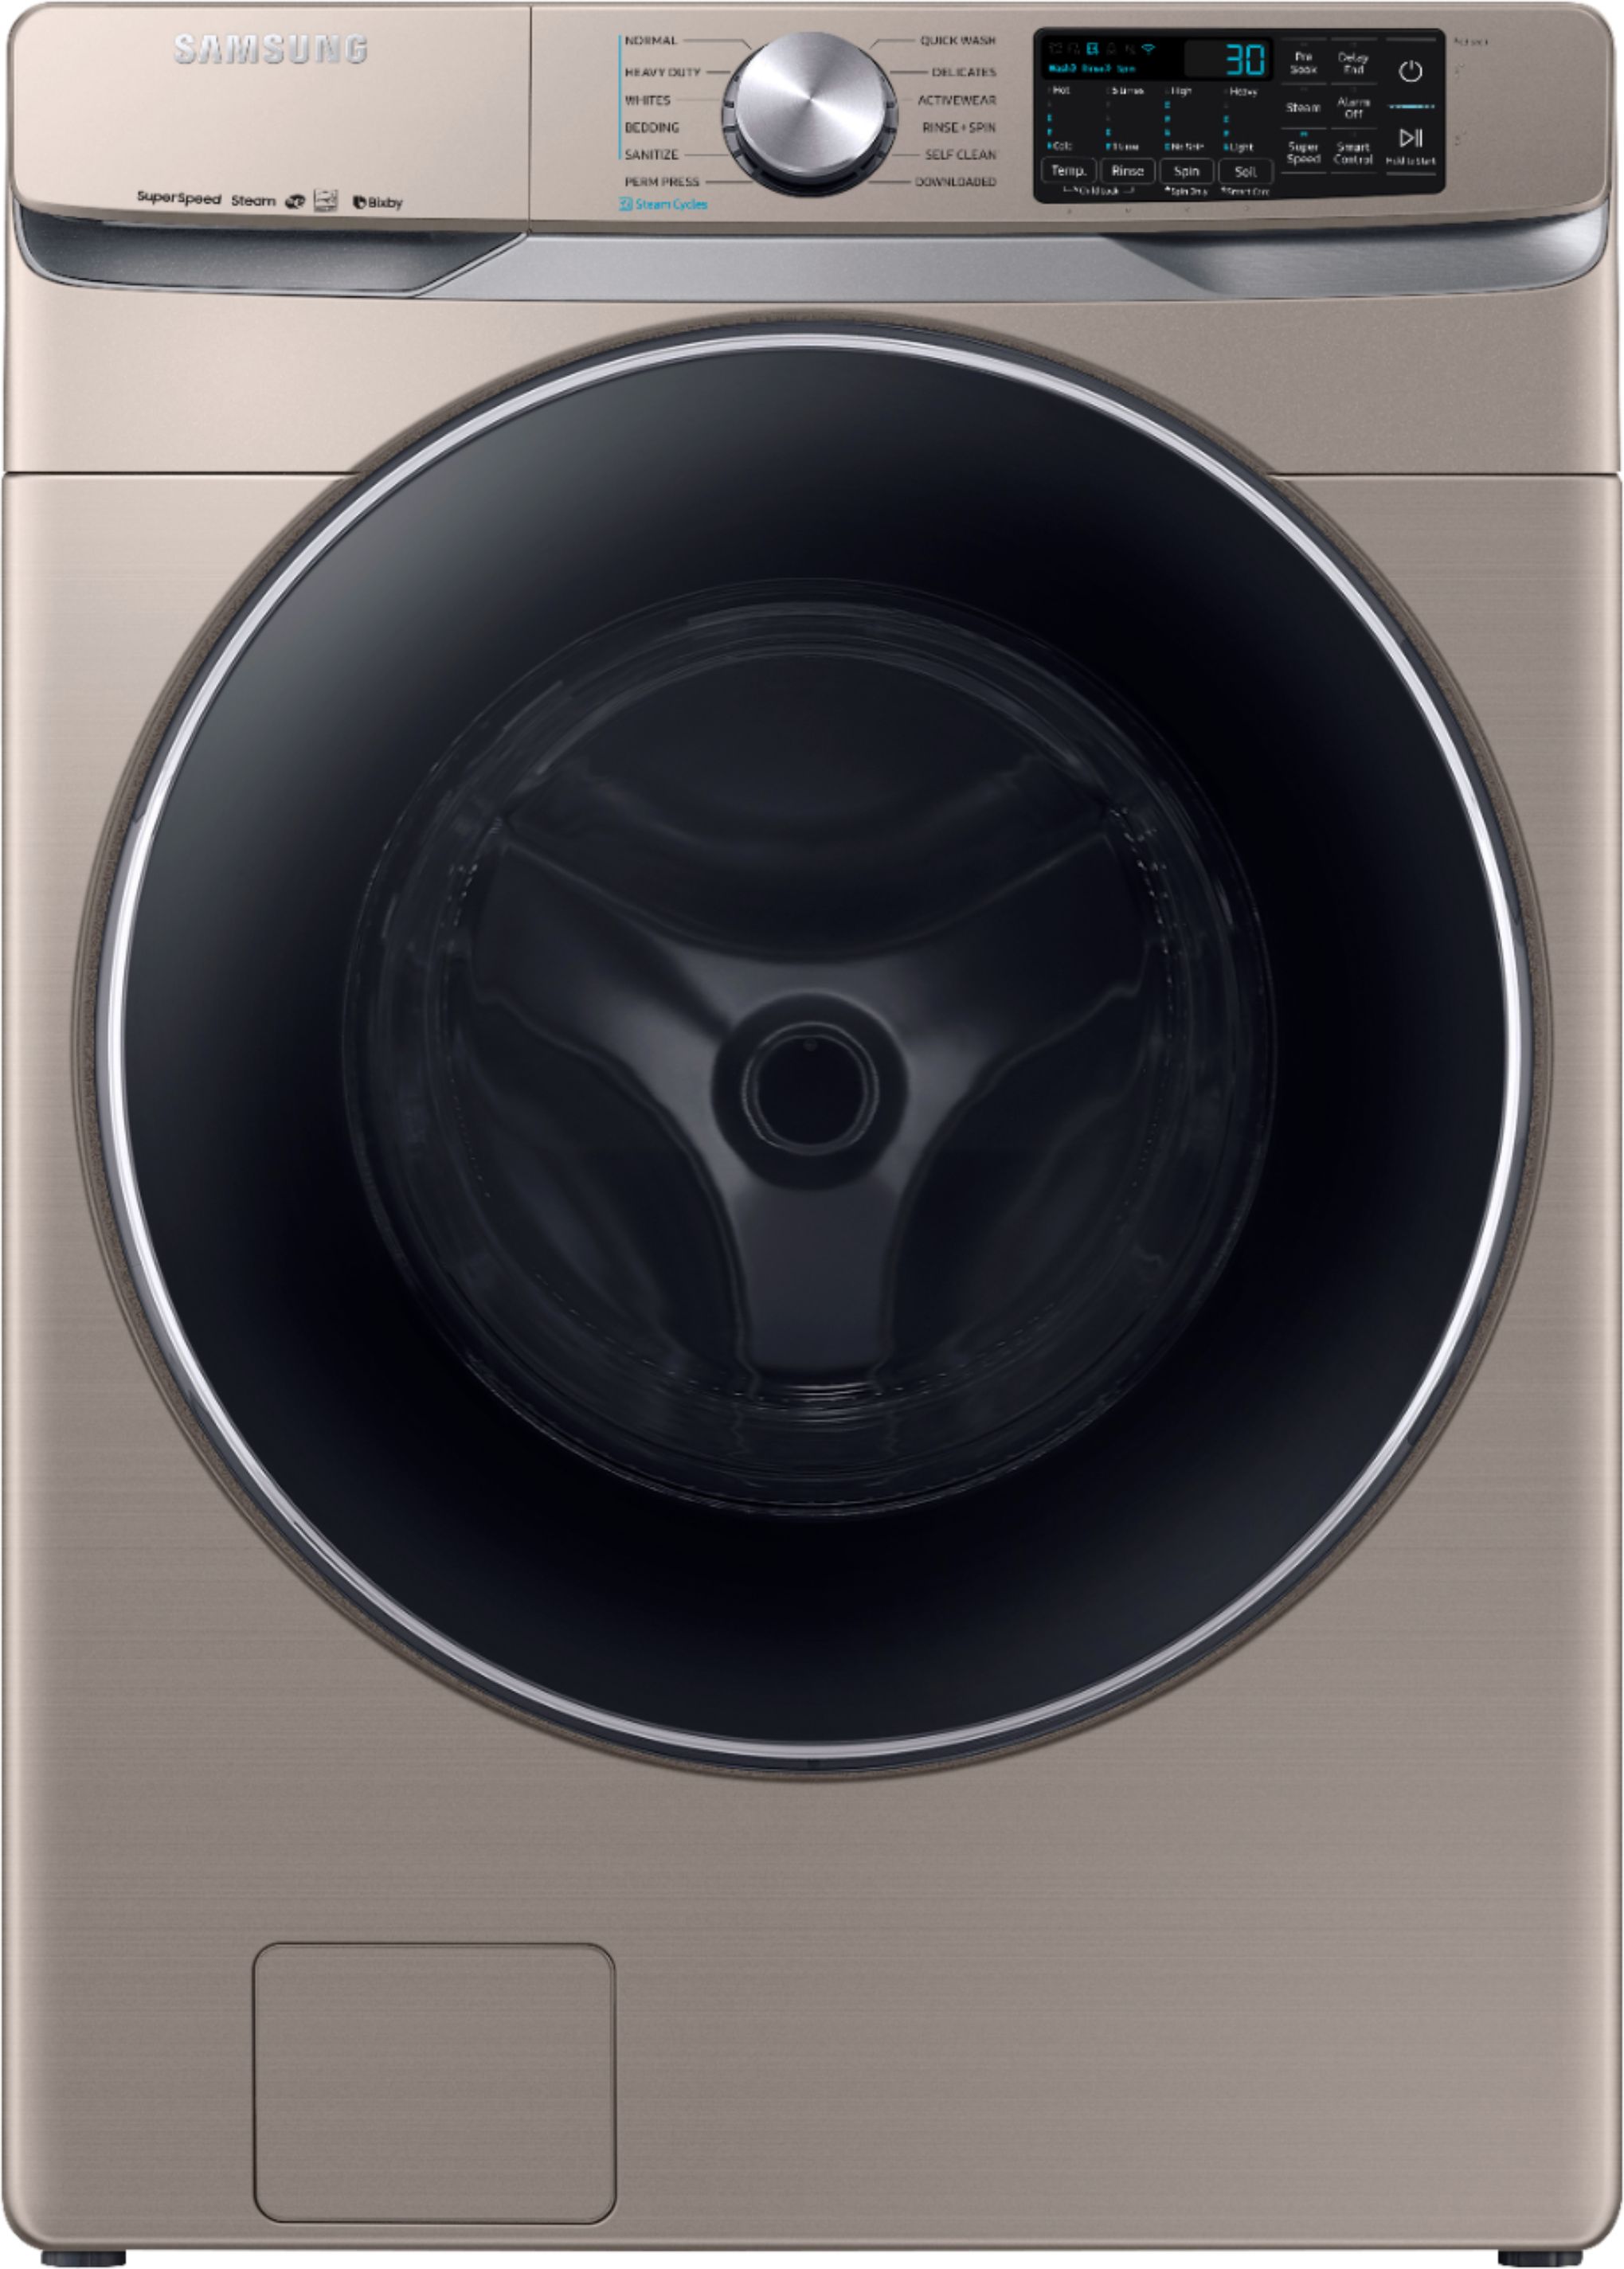 Samsung Washer & Dryer Review –